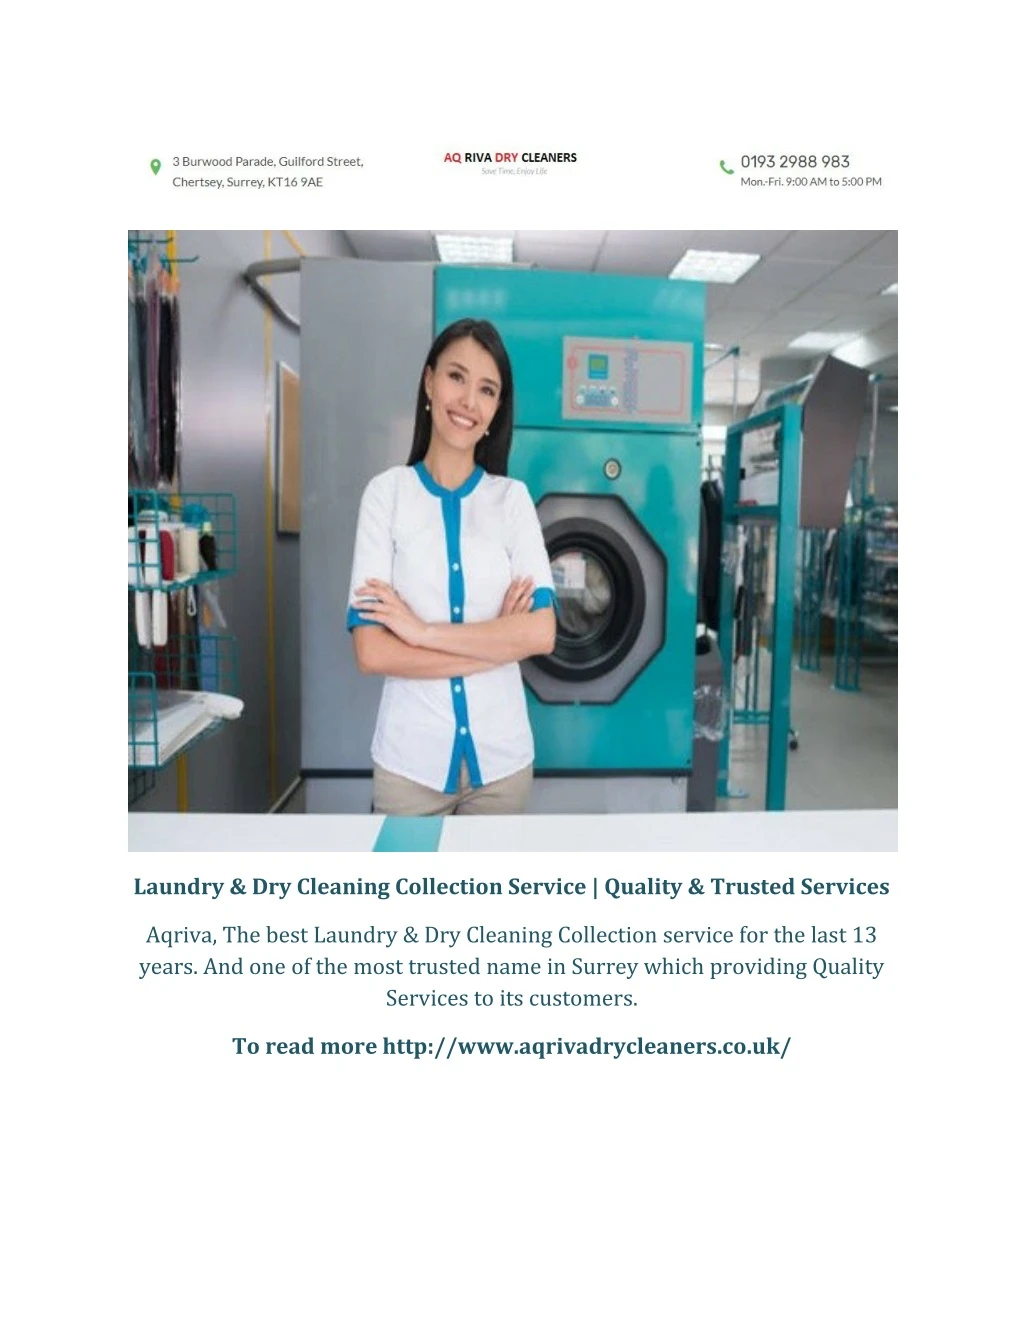 laundry dry cleaning collection service quality